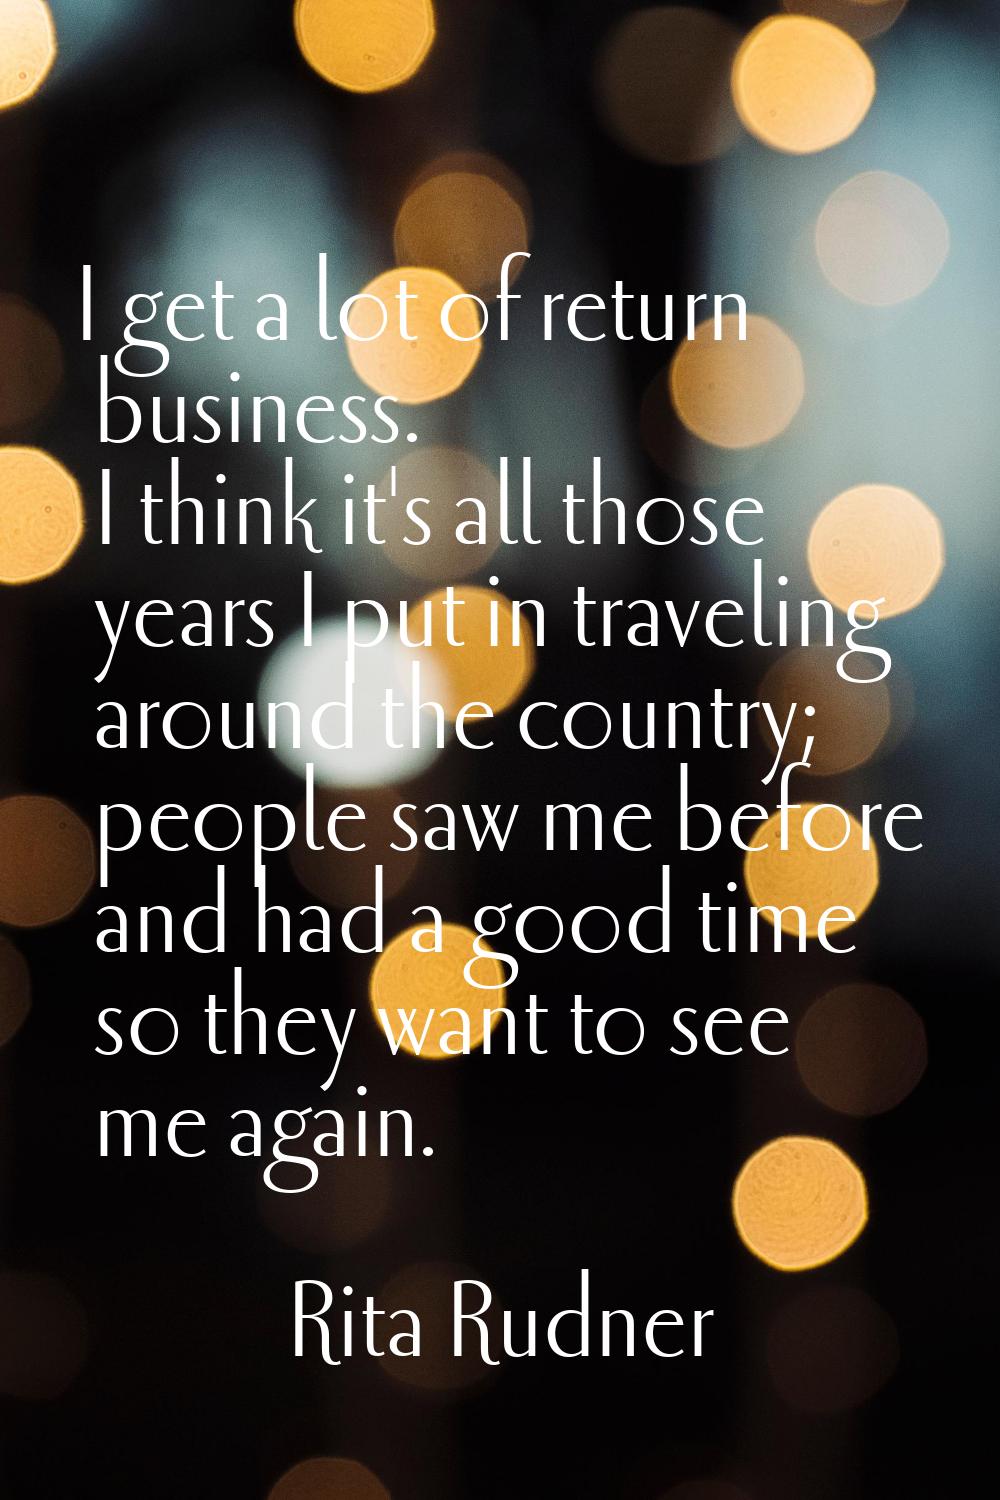 I get a lot of return business. I think it's all those years I put in traveling around the country;